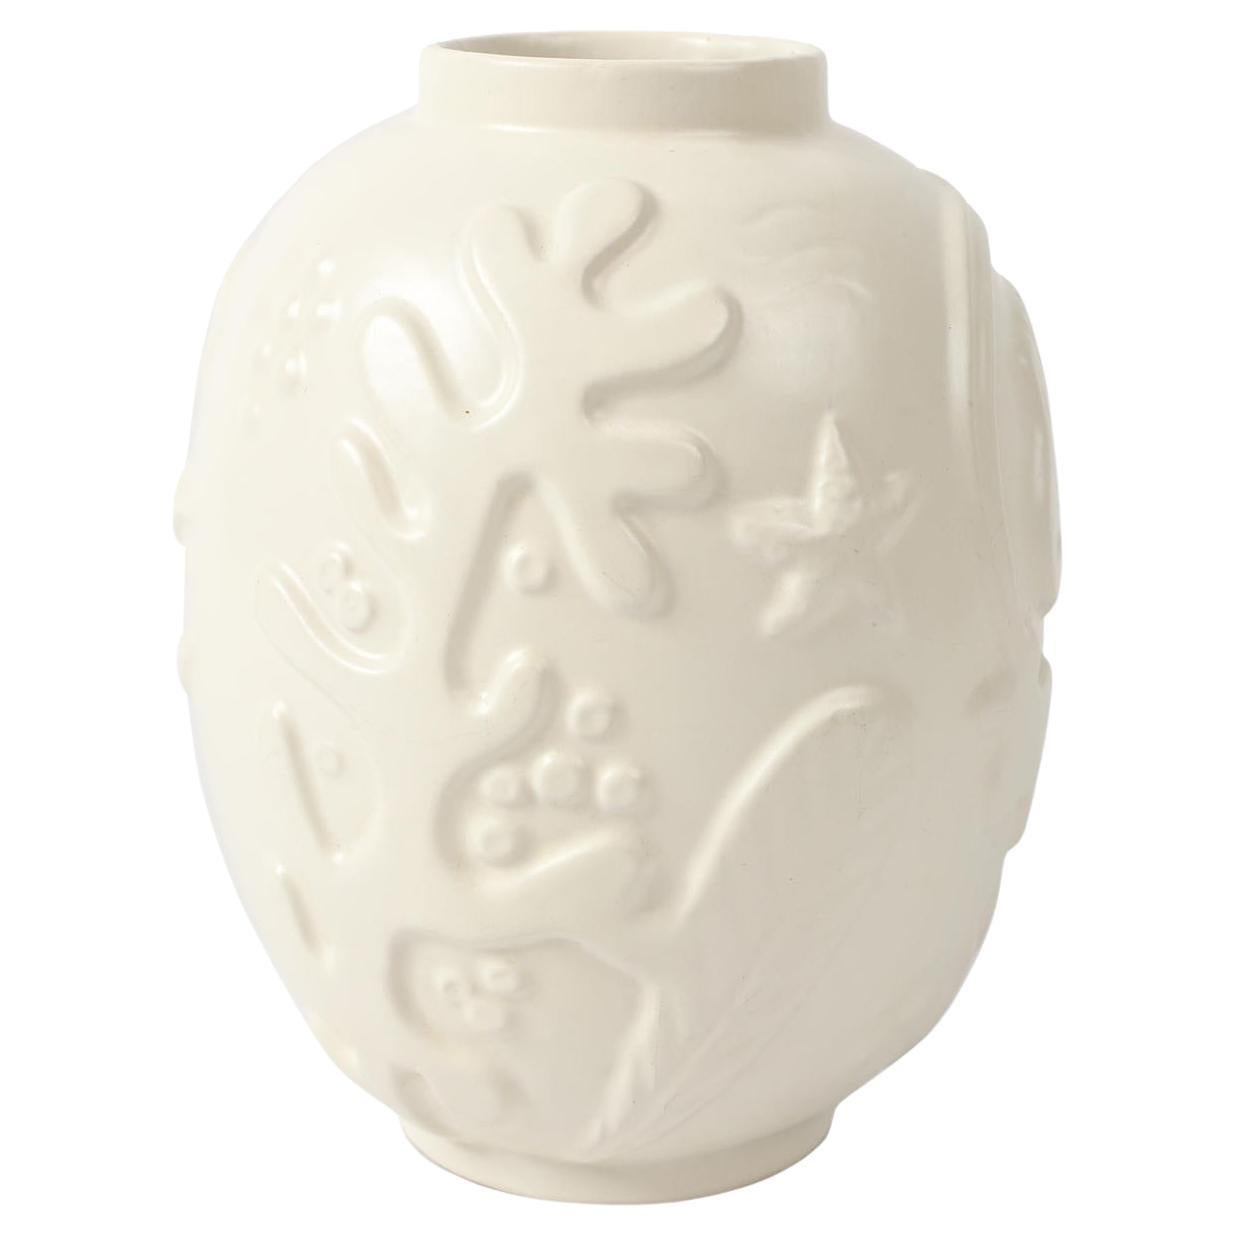 Timeless Elegance: Anna-Lisa Thomson's Iconic Earthenware Vase from the 1930s.